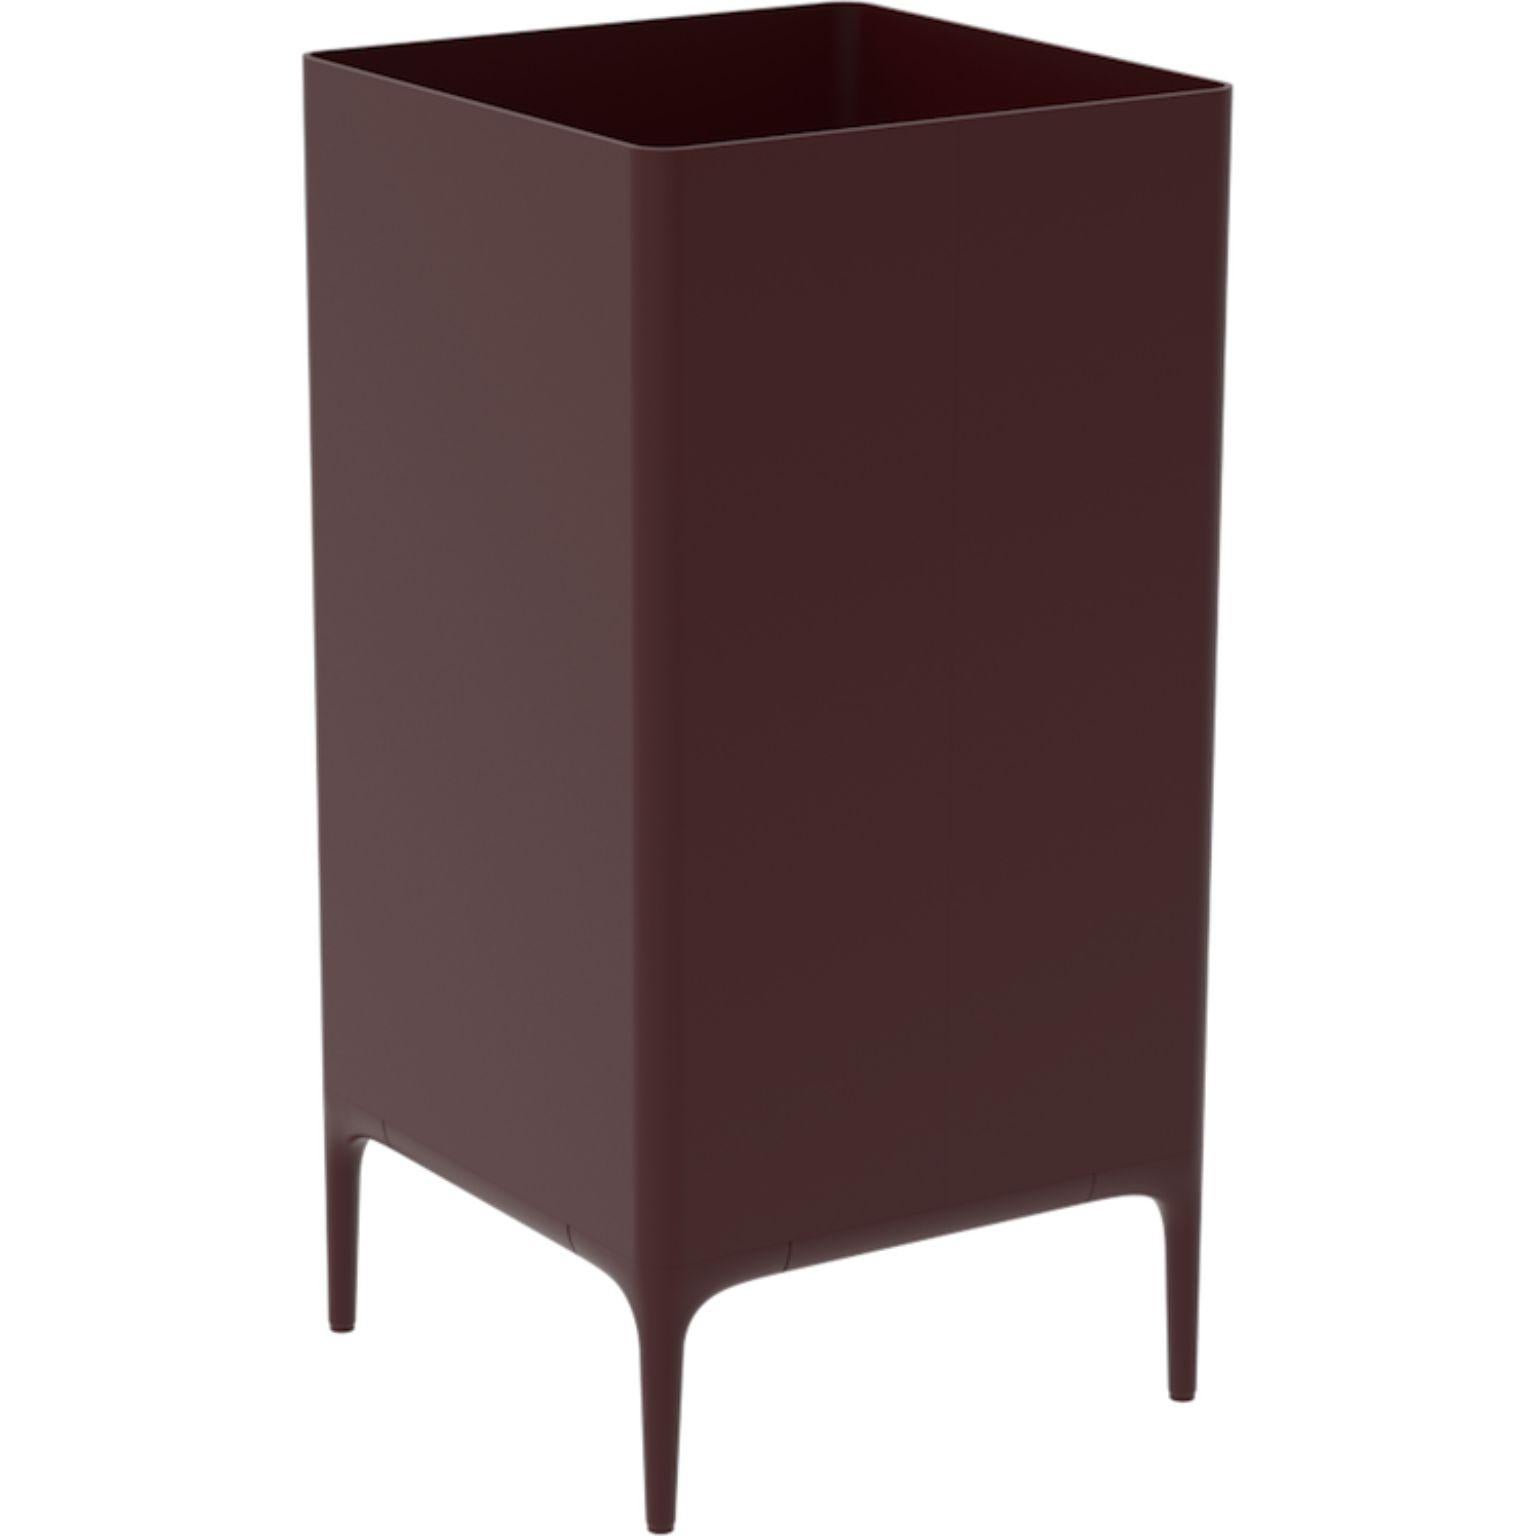 Xaloc burgundy 95 Pot by MOWEE
Dimensions: D45 x W45 x H90 cm
Material: aluminium
Weight: 12 kg
Also available in different colours and finishes. 

 Xaloc synthesizes the lines of interior furniture to extrapolate to the exterior, creating an